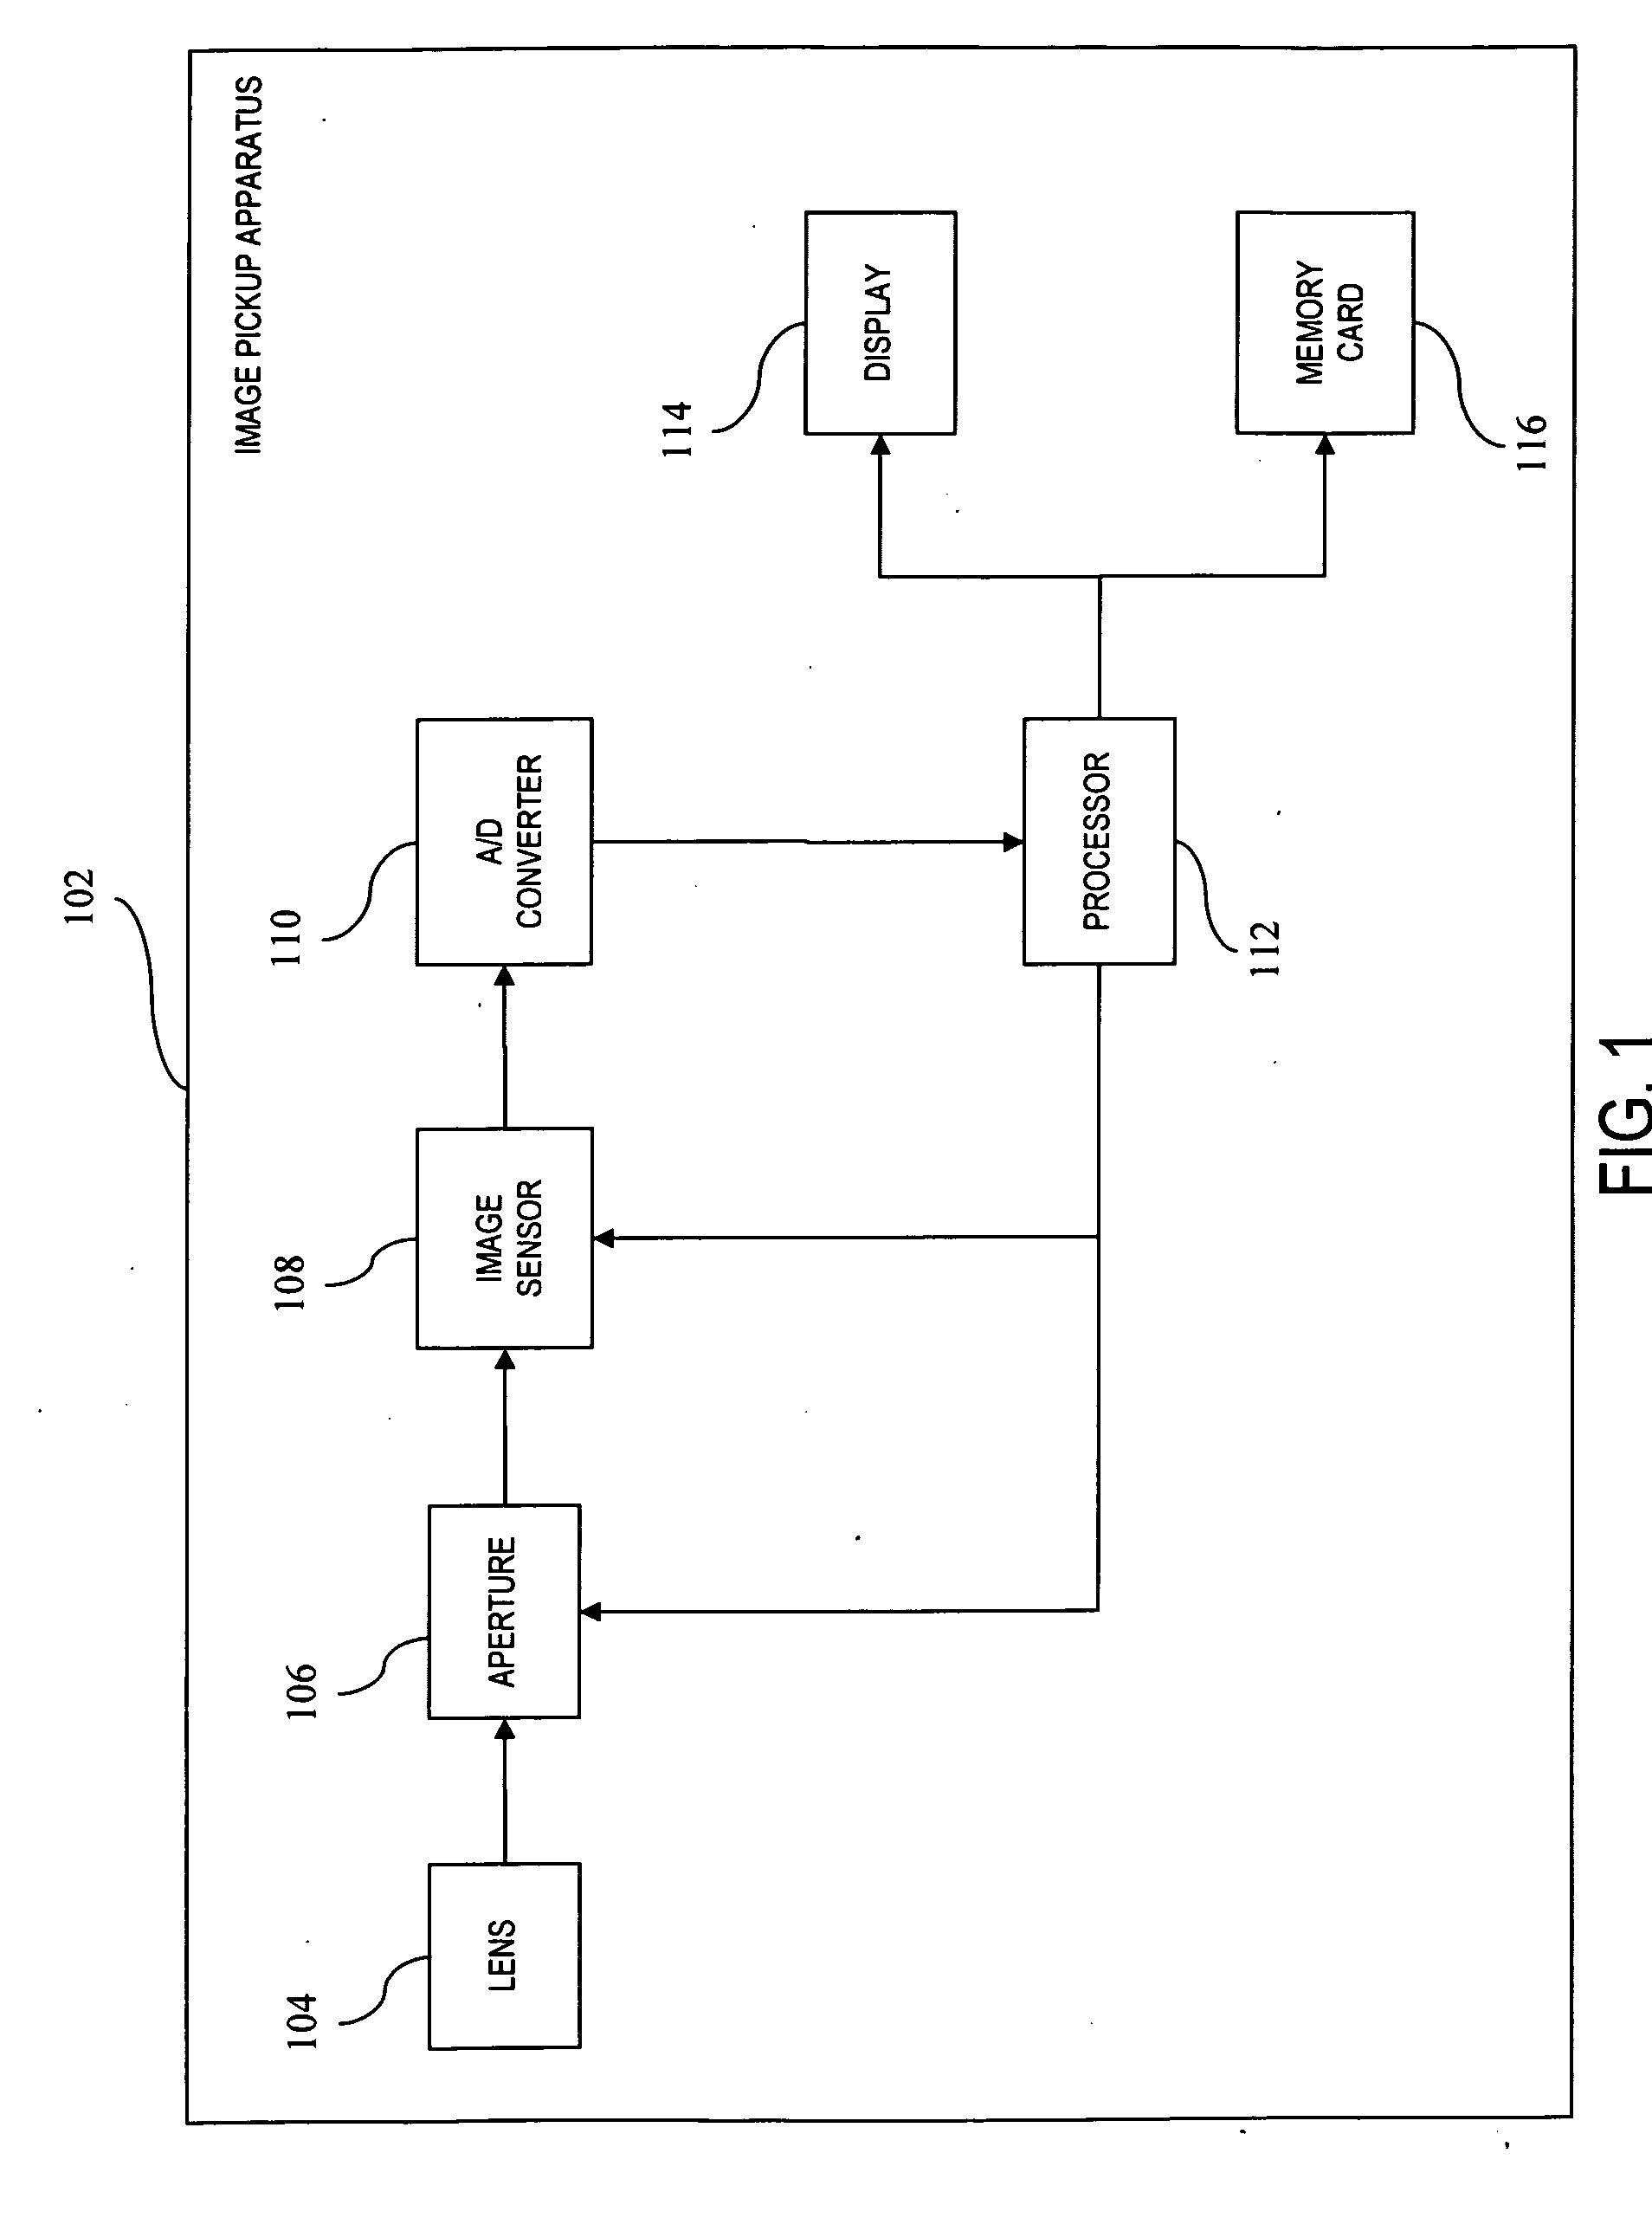 Exposure control for an imaging system